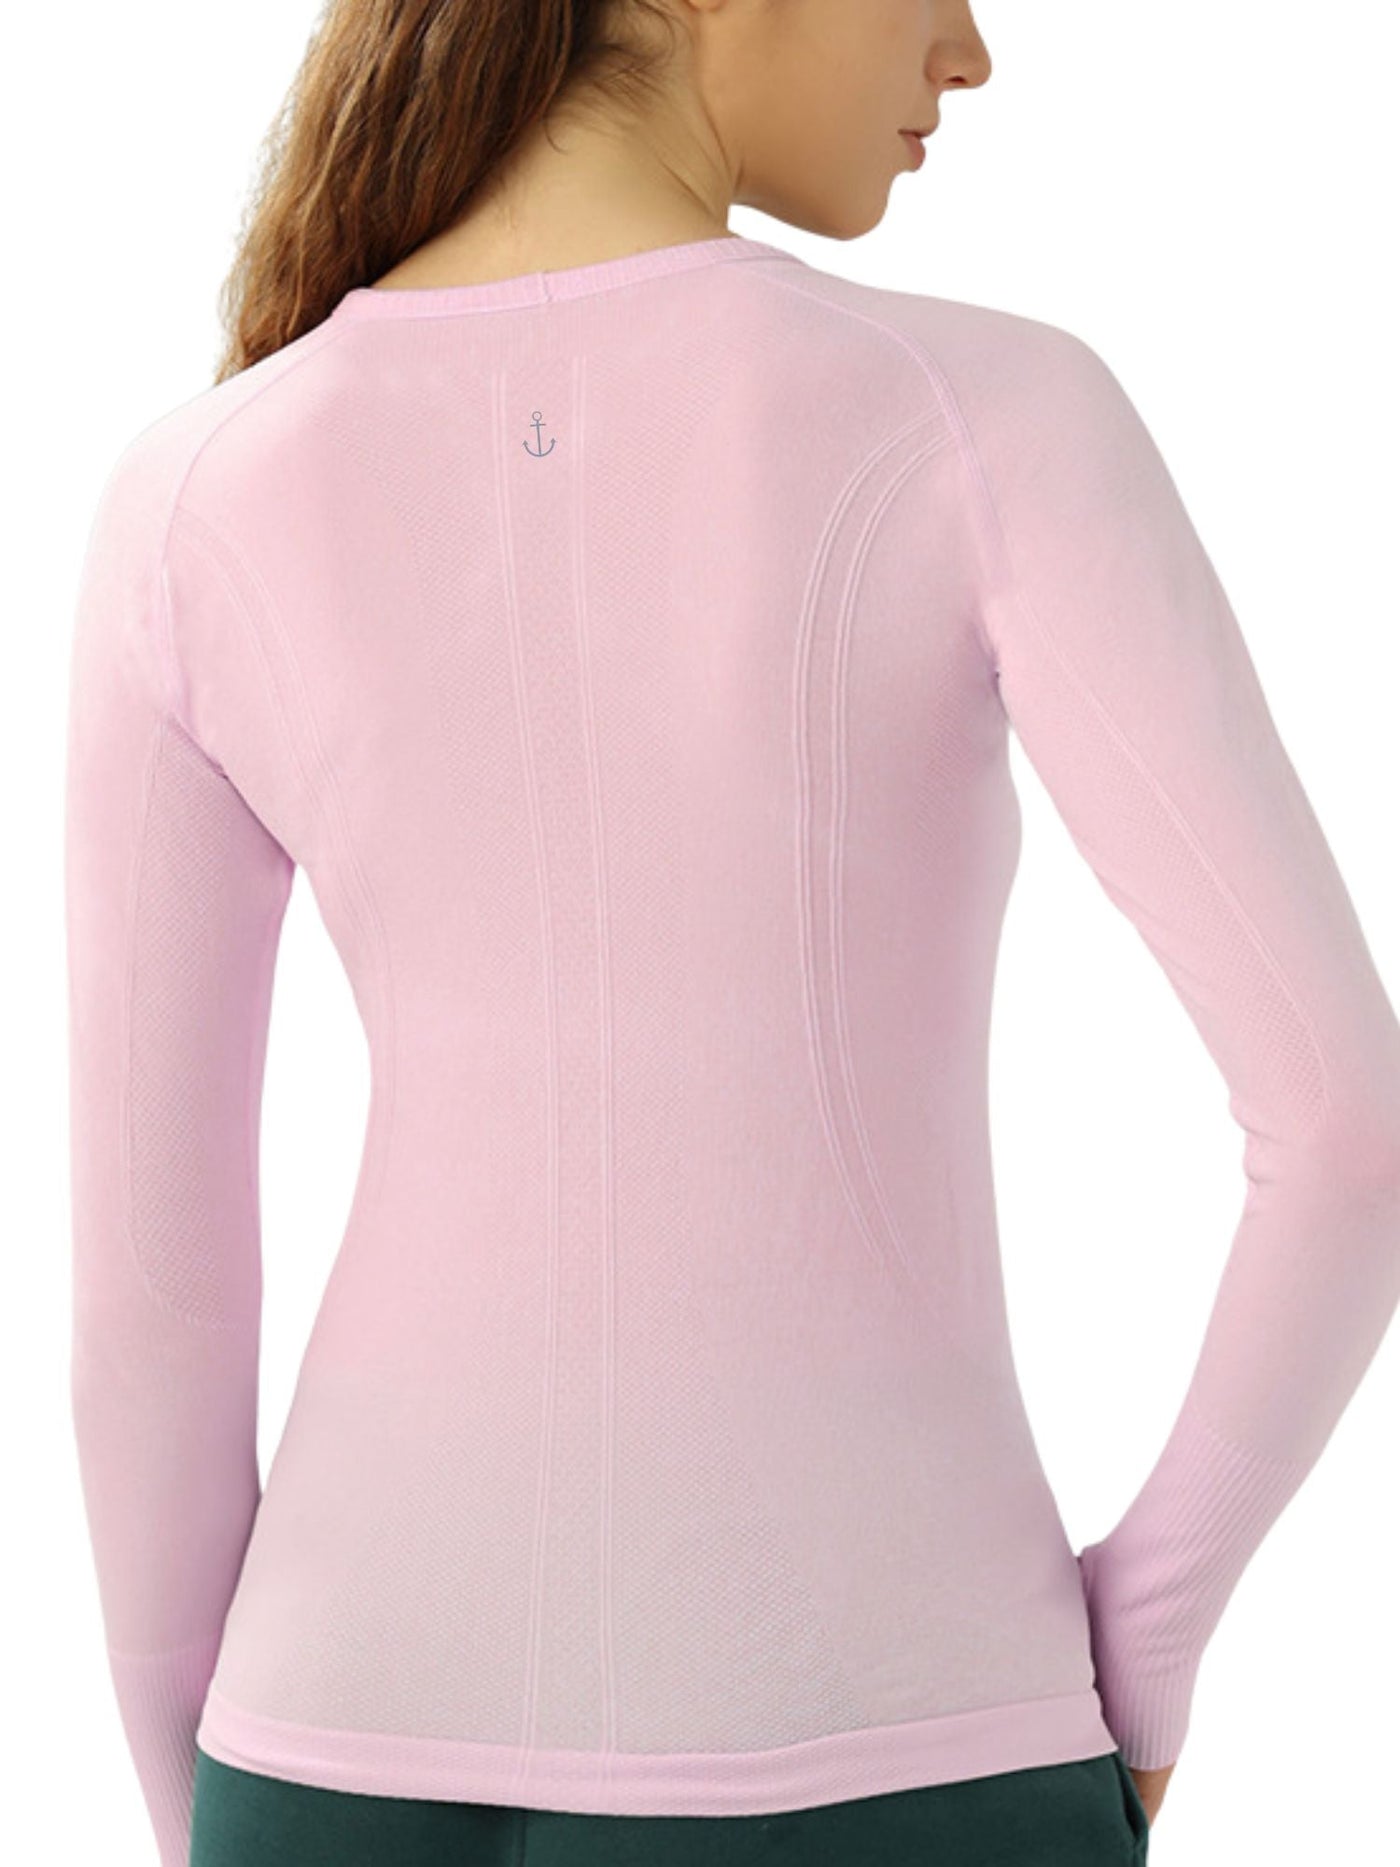 Long Sleeve Navalora Fit Active Tee Swiftly Dupe with Anchor Logo in Baby Pink Back View